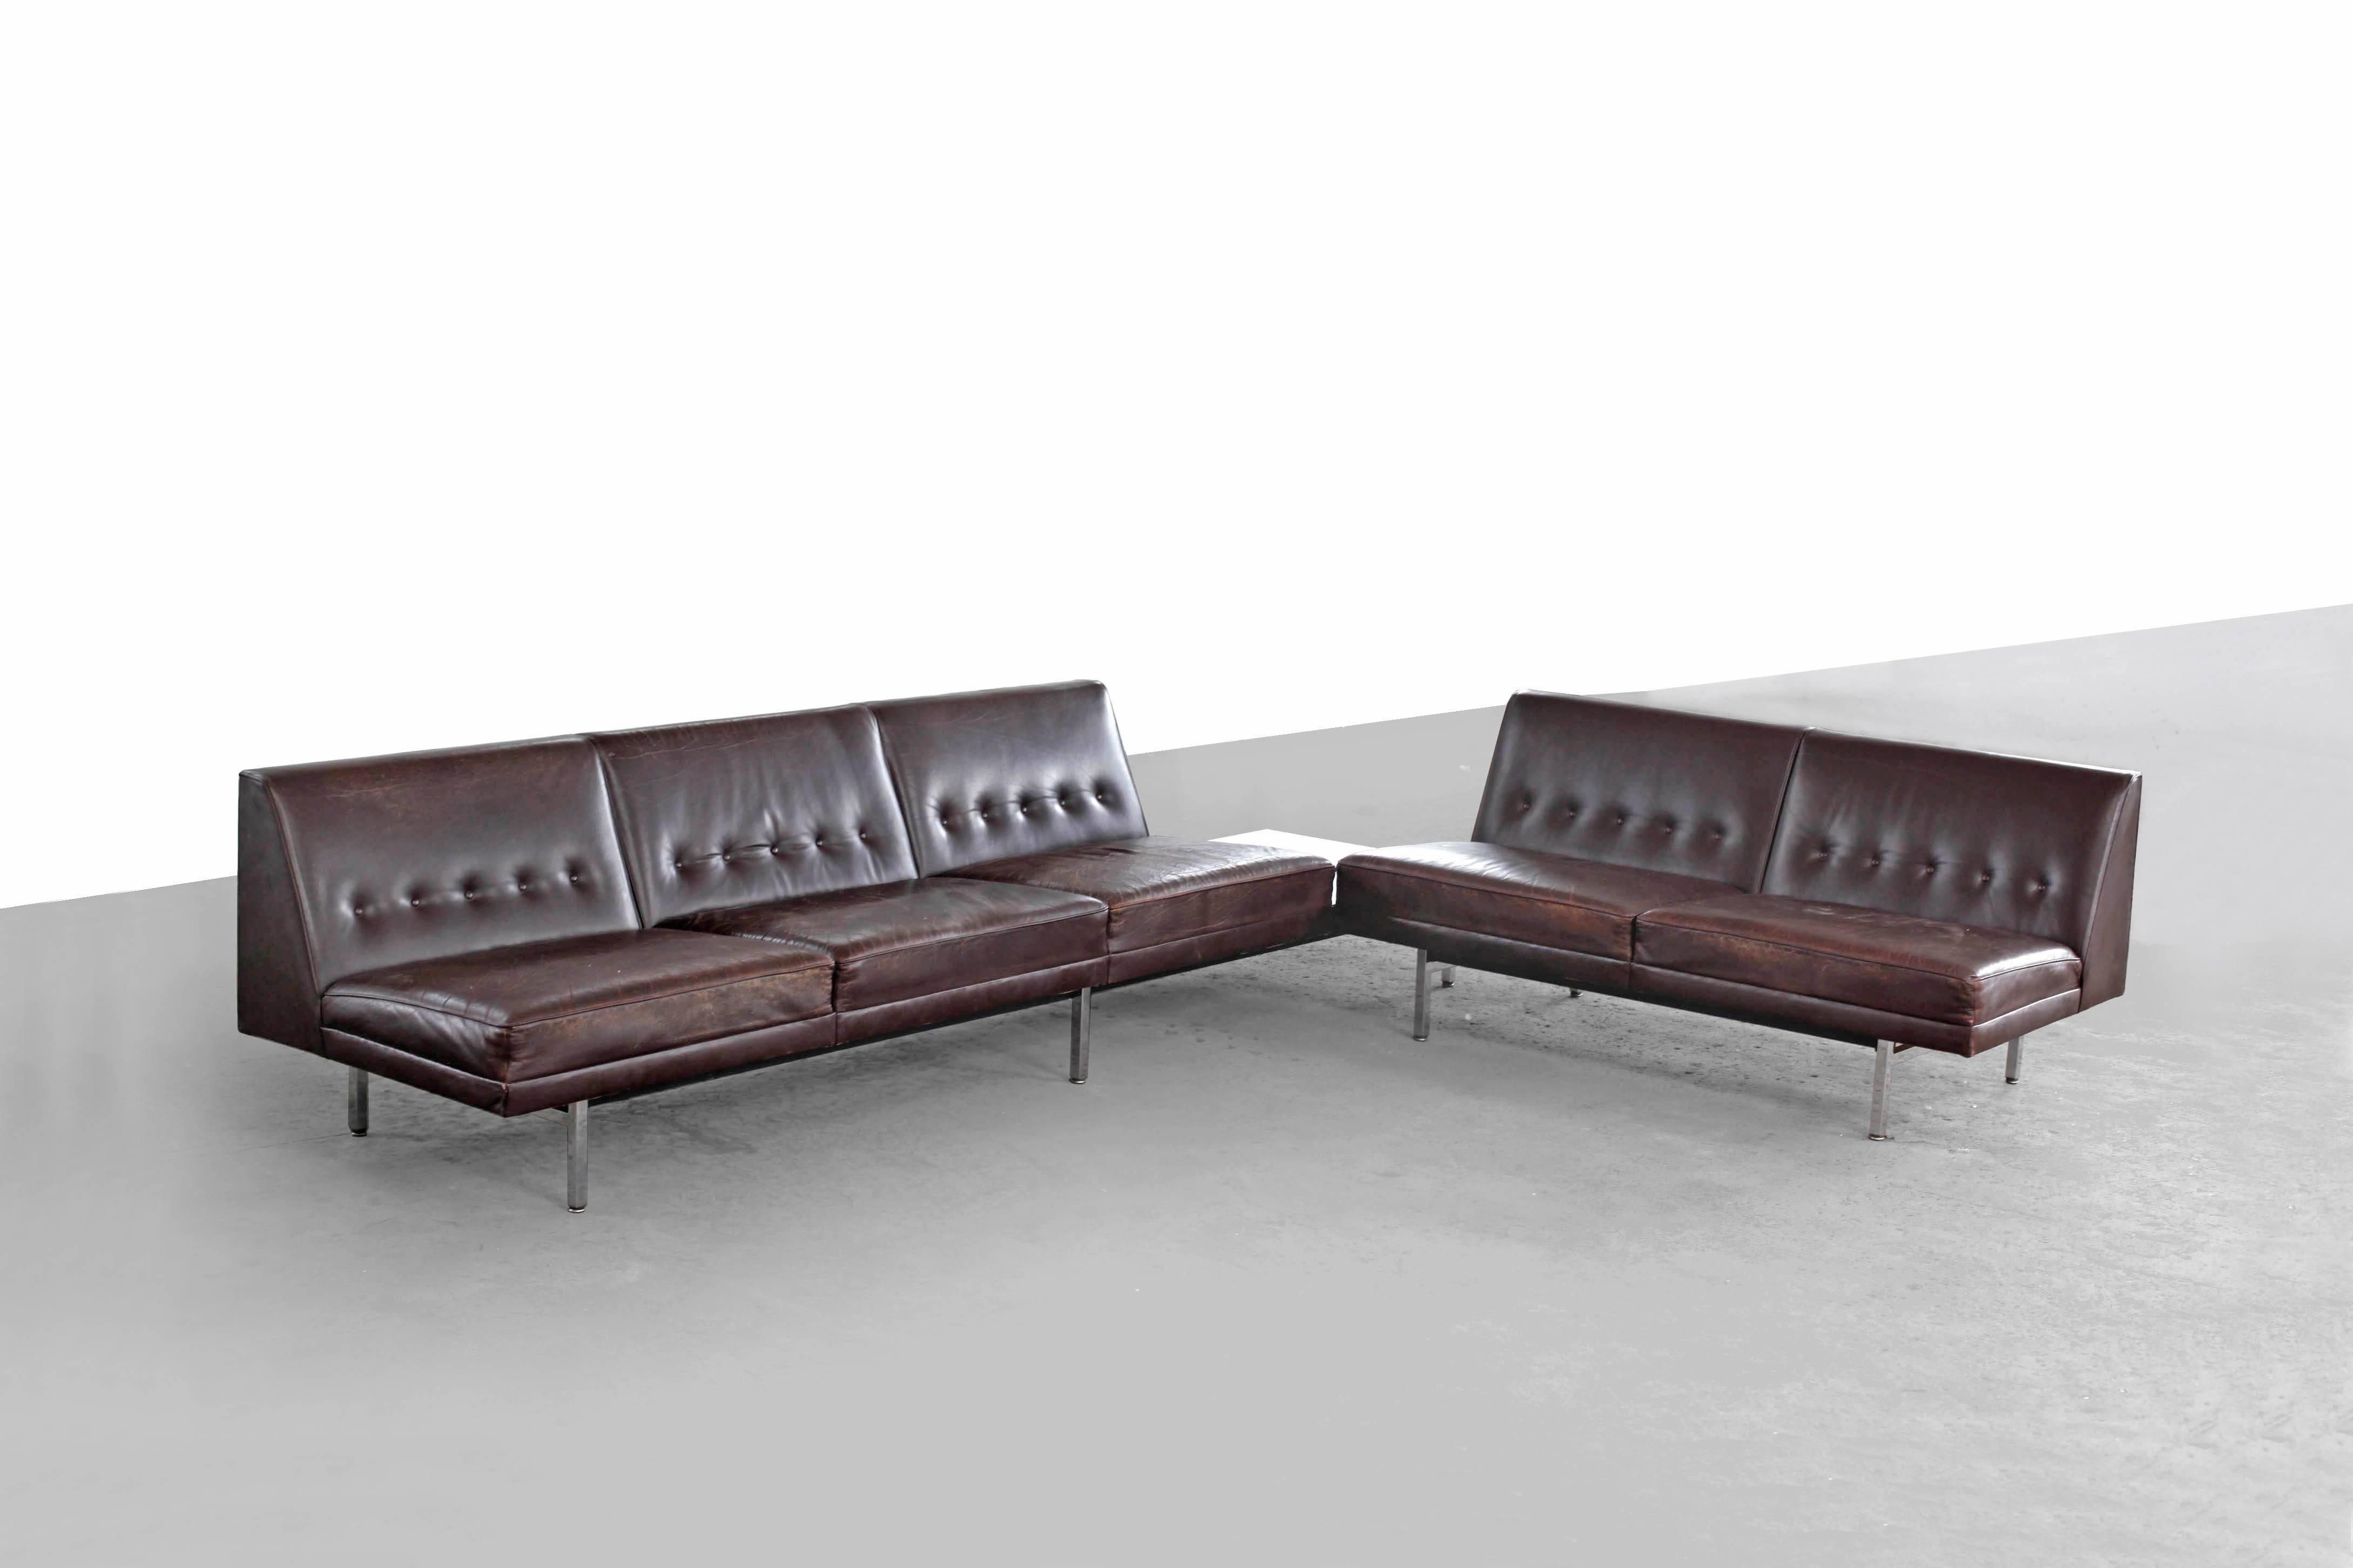 Modular seating system by George Nelson for Herman Miller produced from 1956-1978.
This six-part system can be positioned variably. An absolute design Classic in the original condition. The dark brown leather is heavily patinated by the years. A